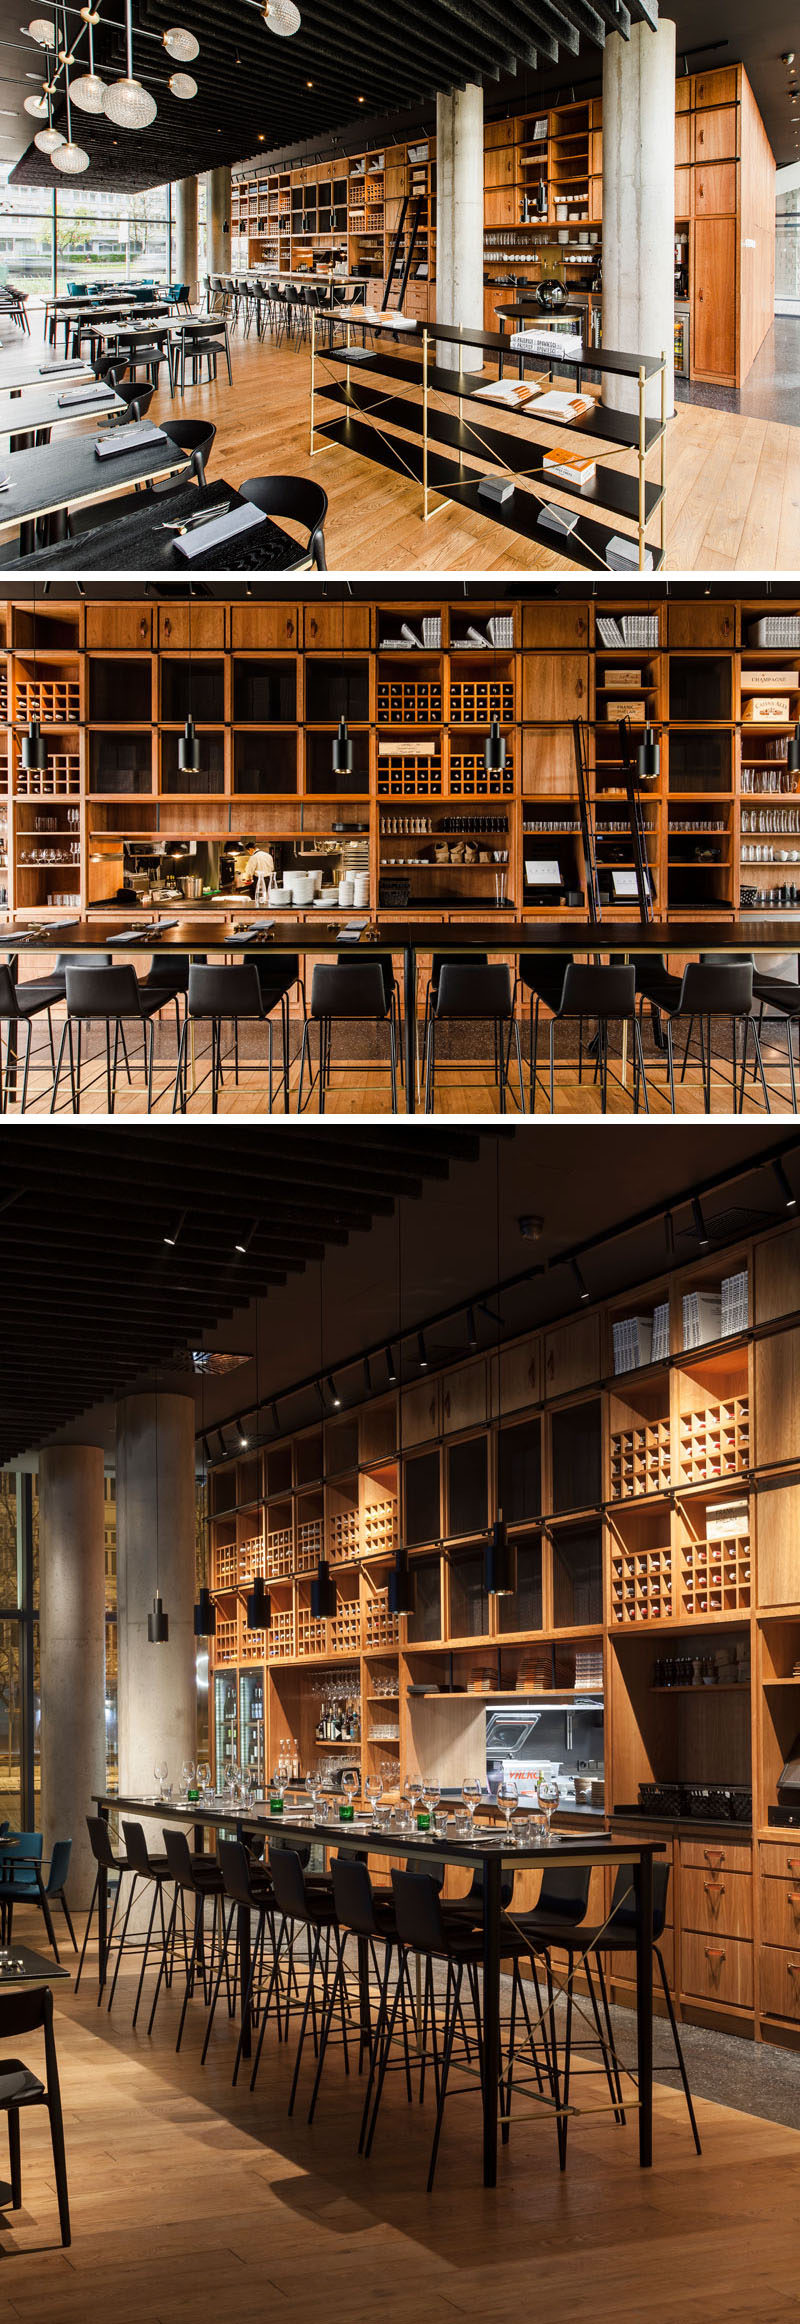 The dining room of this modern restaurant features a large floor-to-ceiling wood shelving unit that measures in at almost 14-meters-long. #RestaurantDesign #Shelving